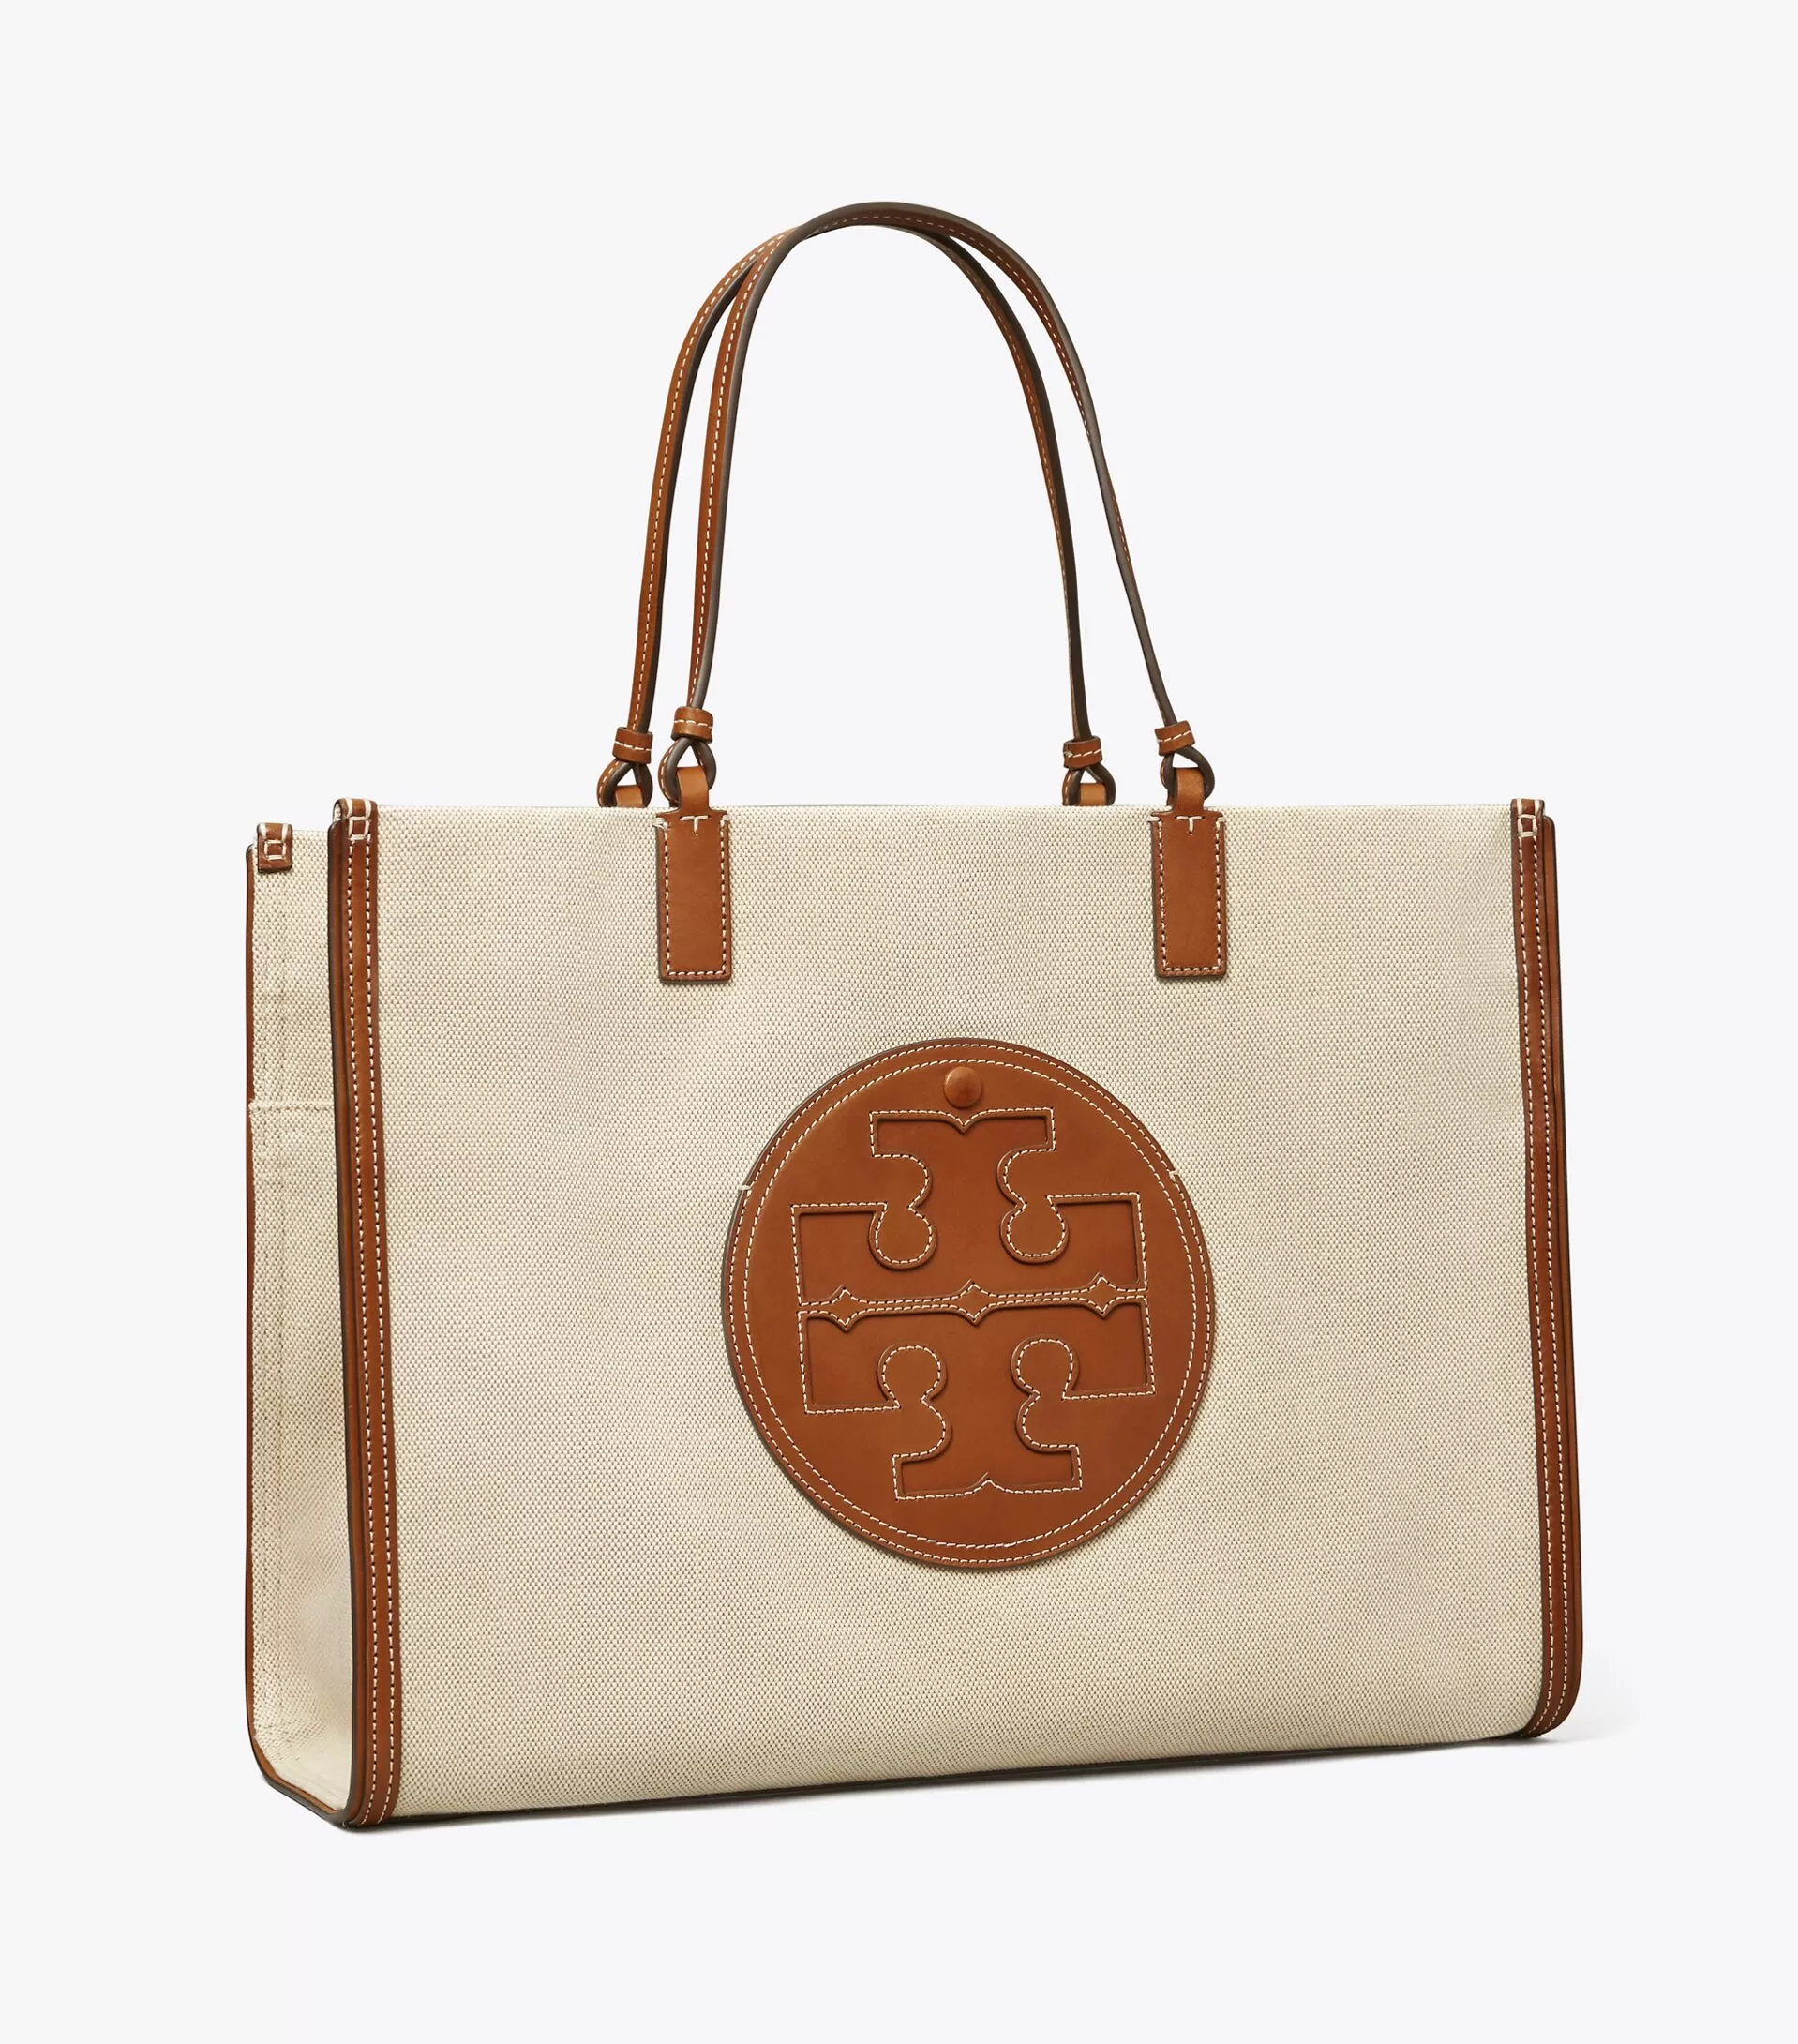 Tory Burch Outlet Bags - April Golightly